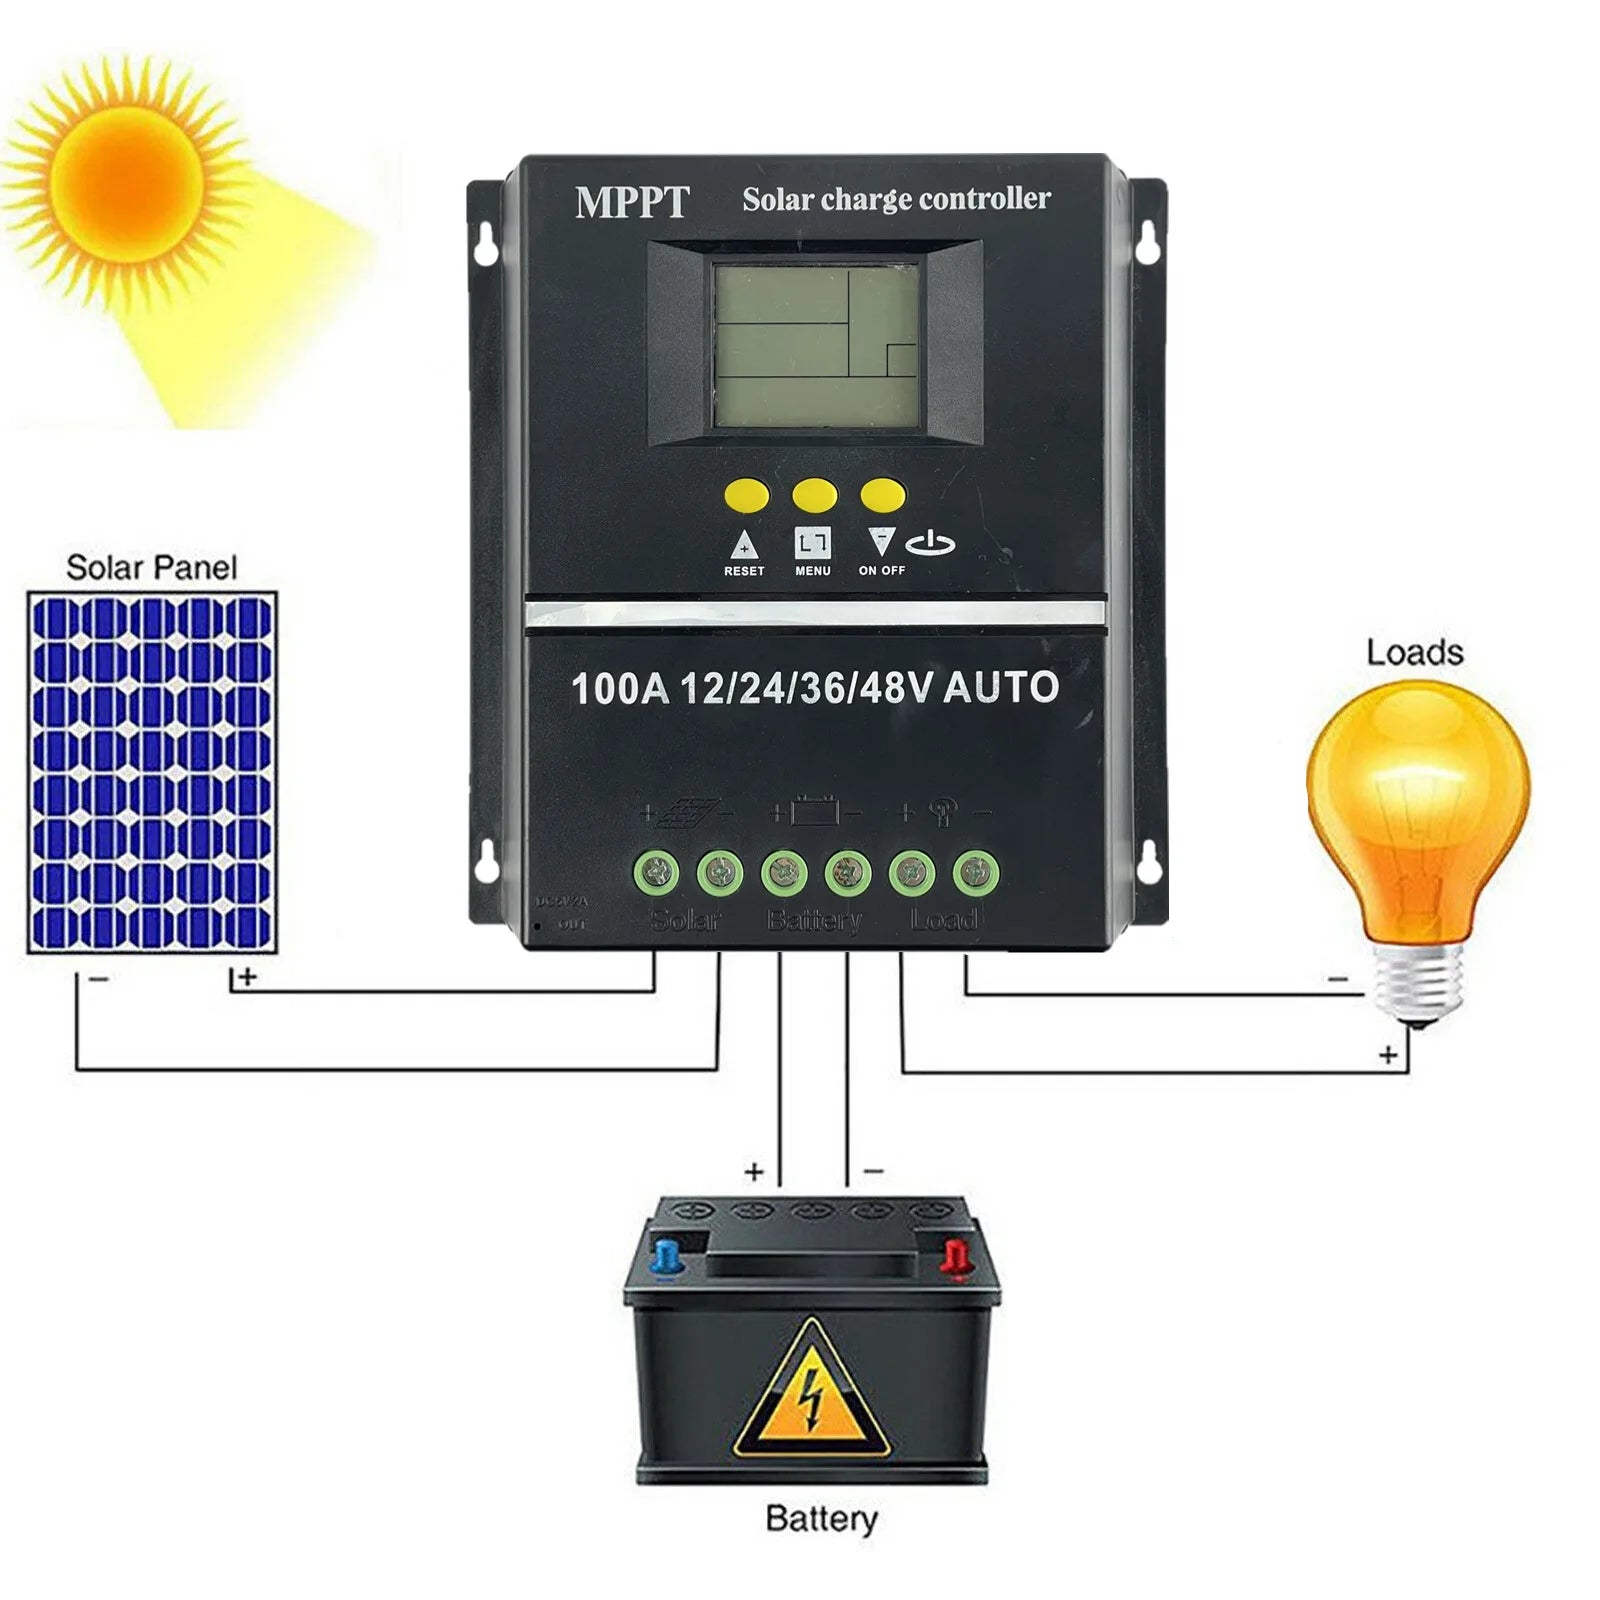 Solar charge controller for 12/24/36/48V systems with auto-tracking, LCD display, and dual USB ports.